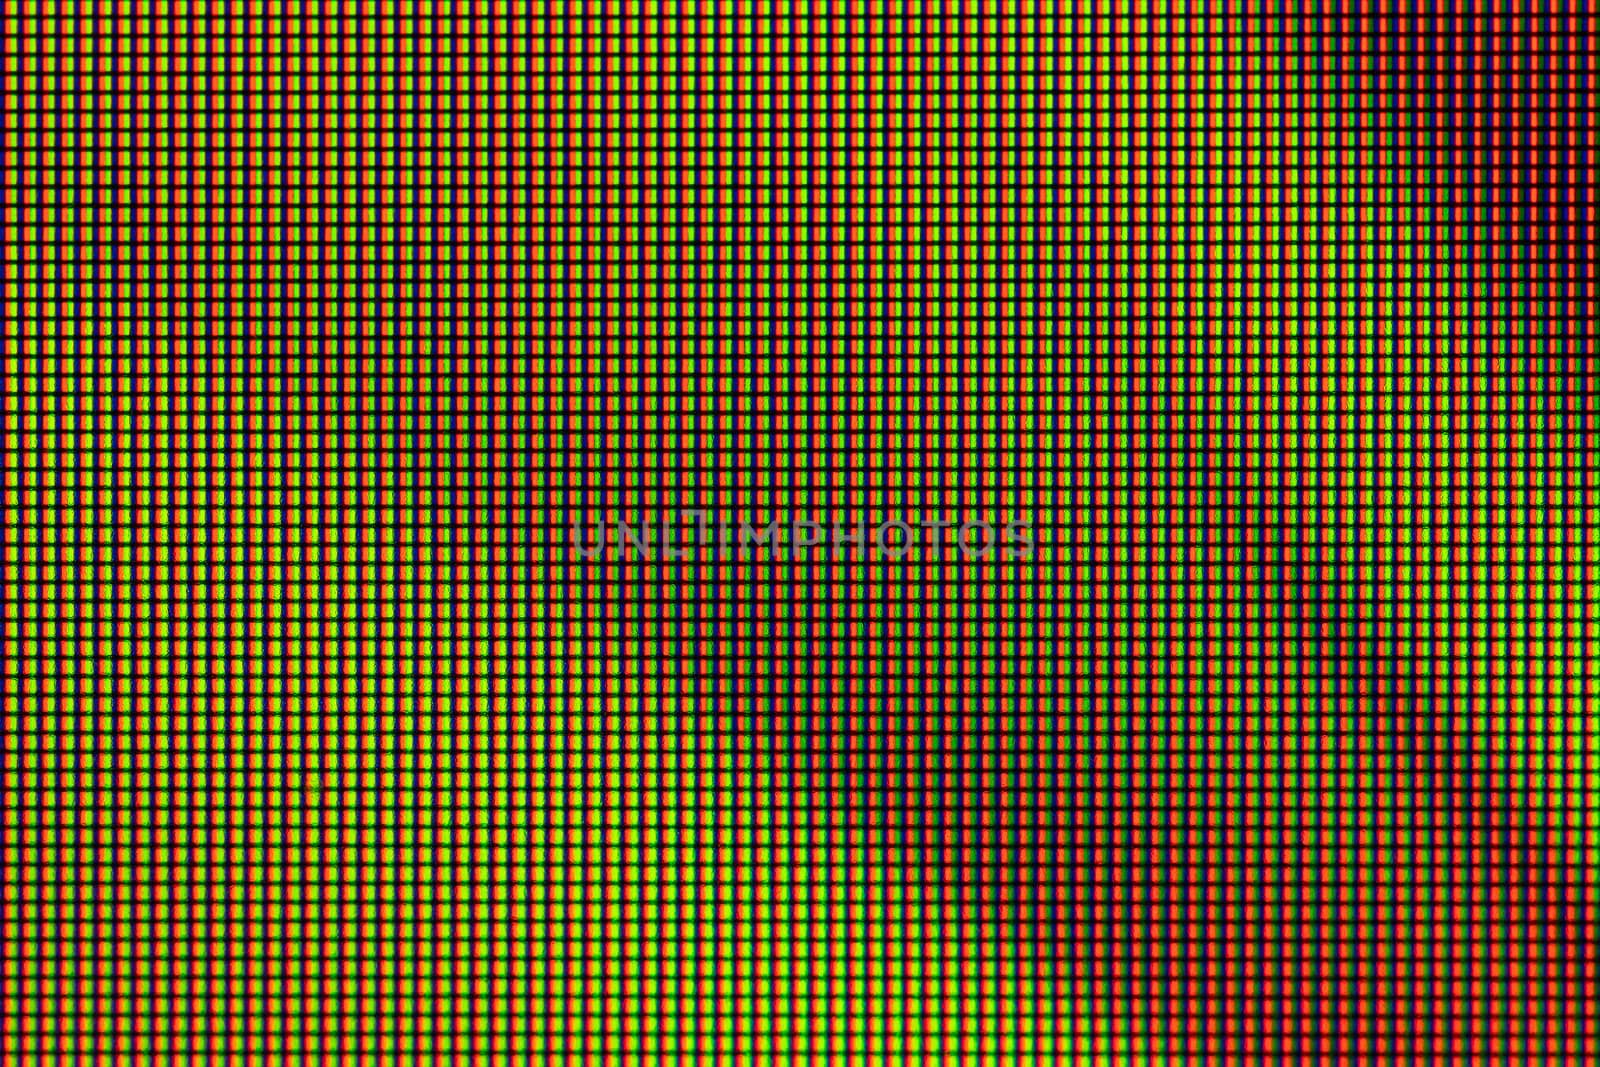 Closeup RGB LED diode from LED TV or LED monitor computer screen display panel.